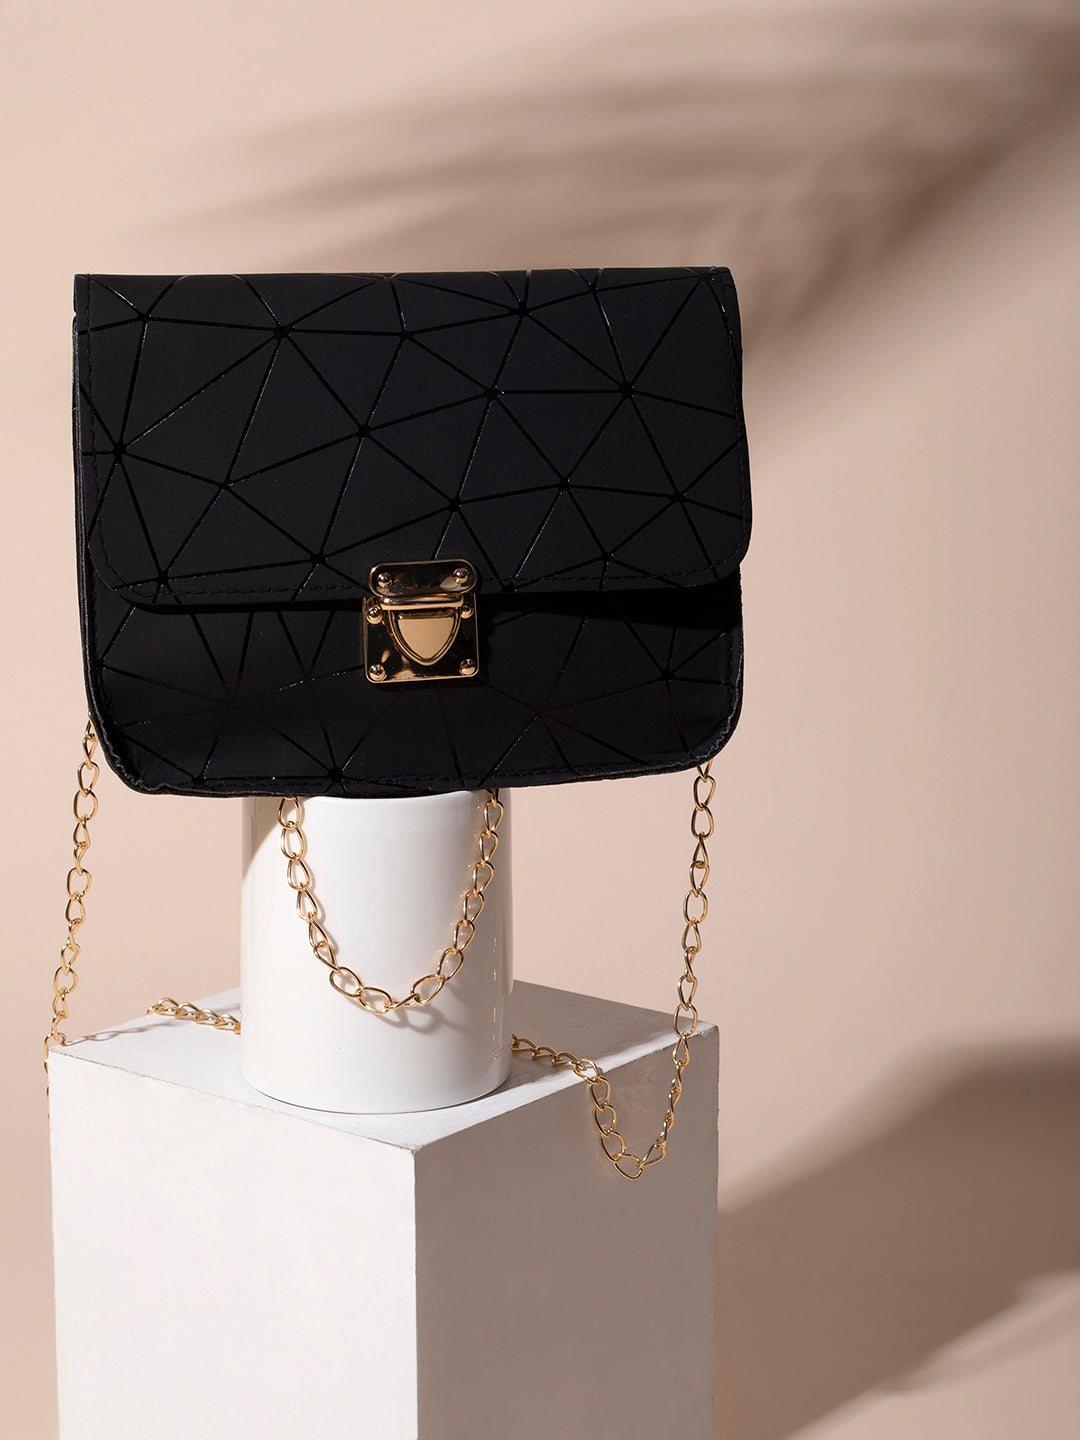 Black Handbags - The Ultimate Style Statement